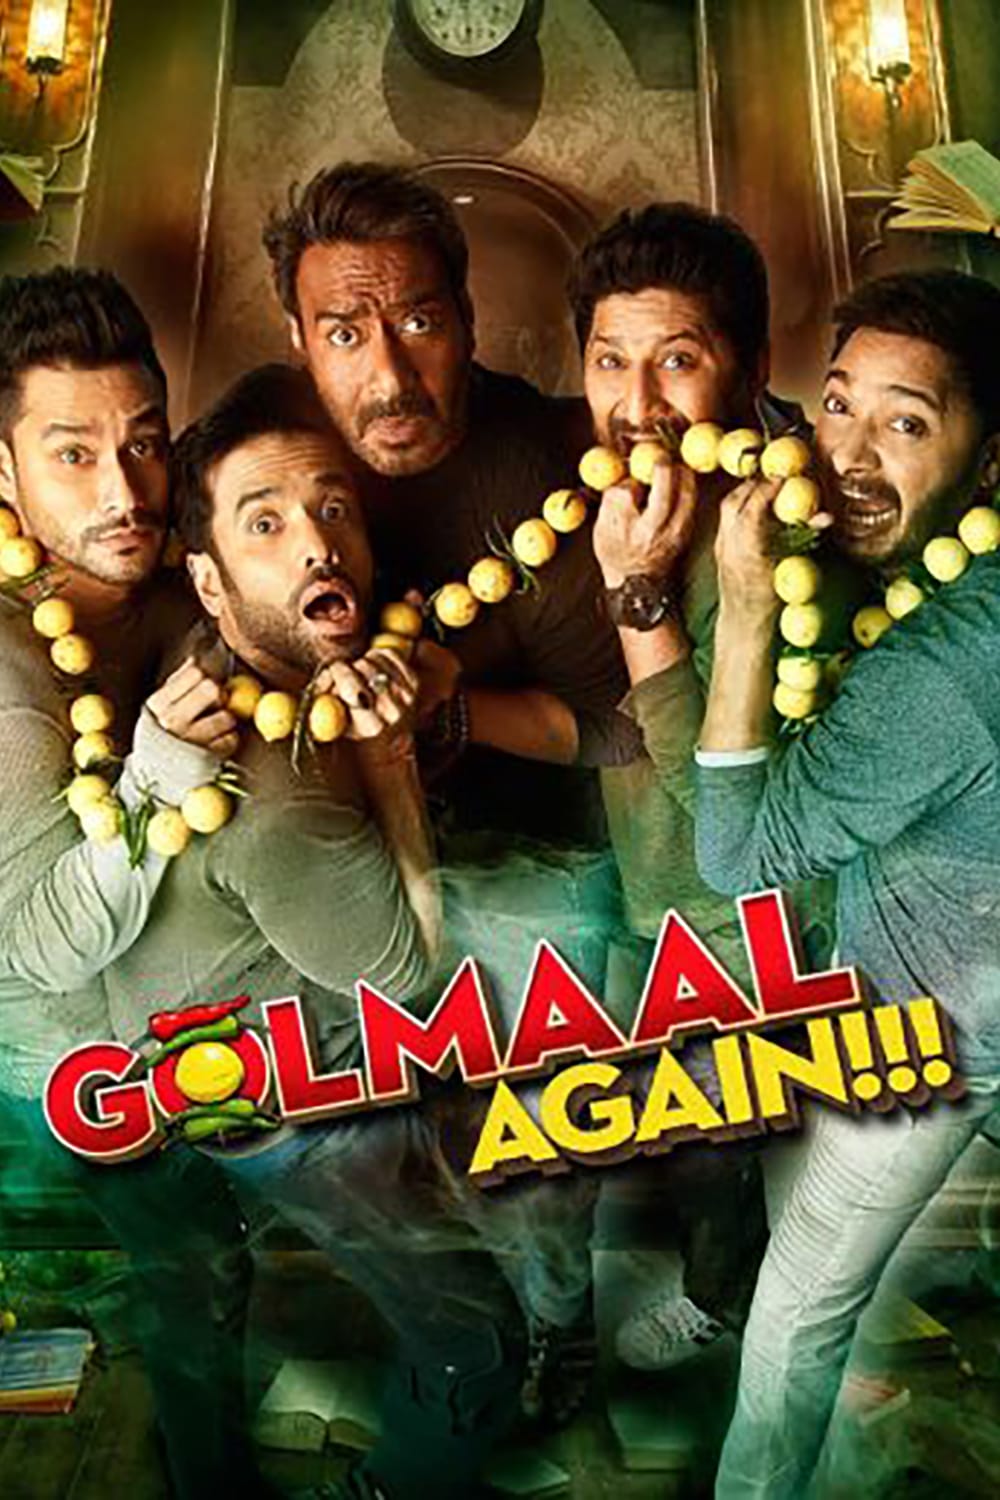 Poster for the movie "Golmaal Again"